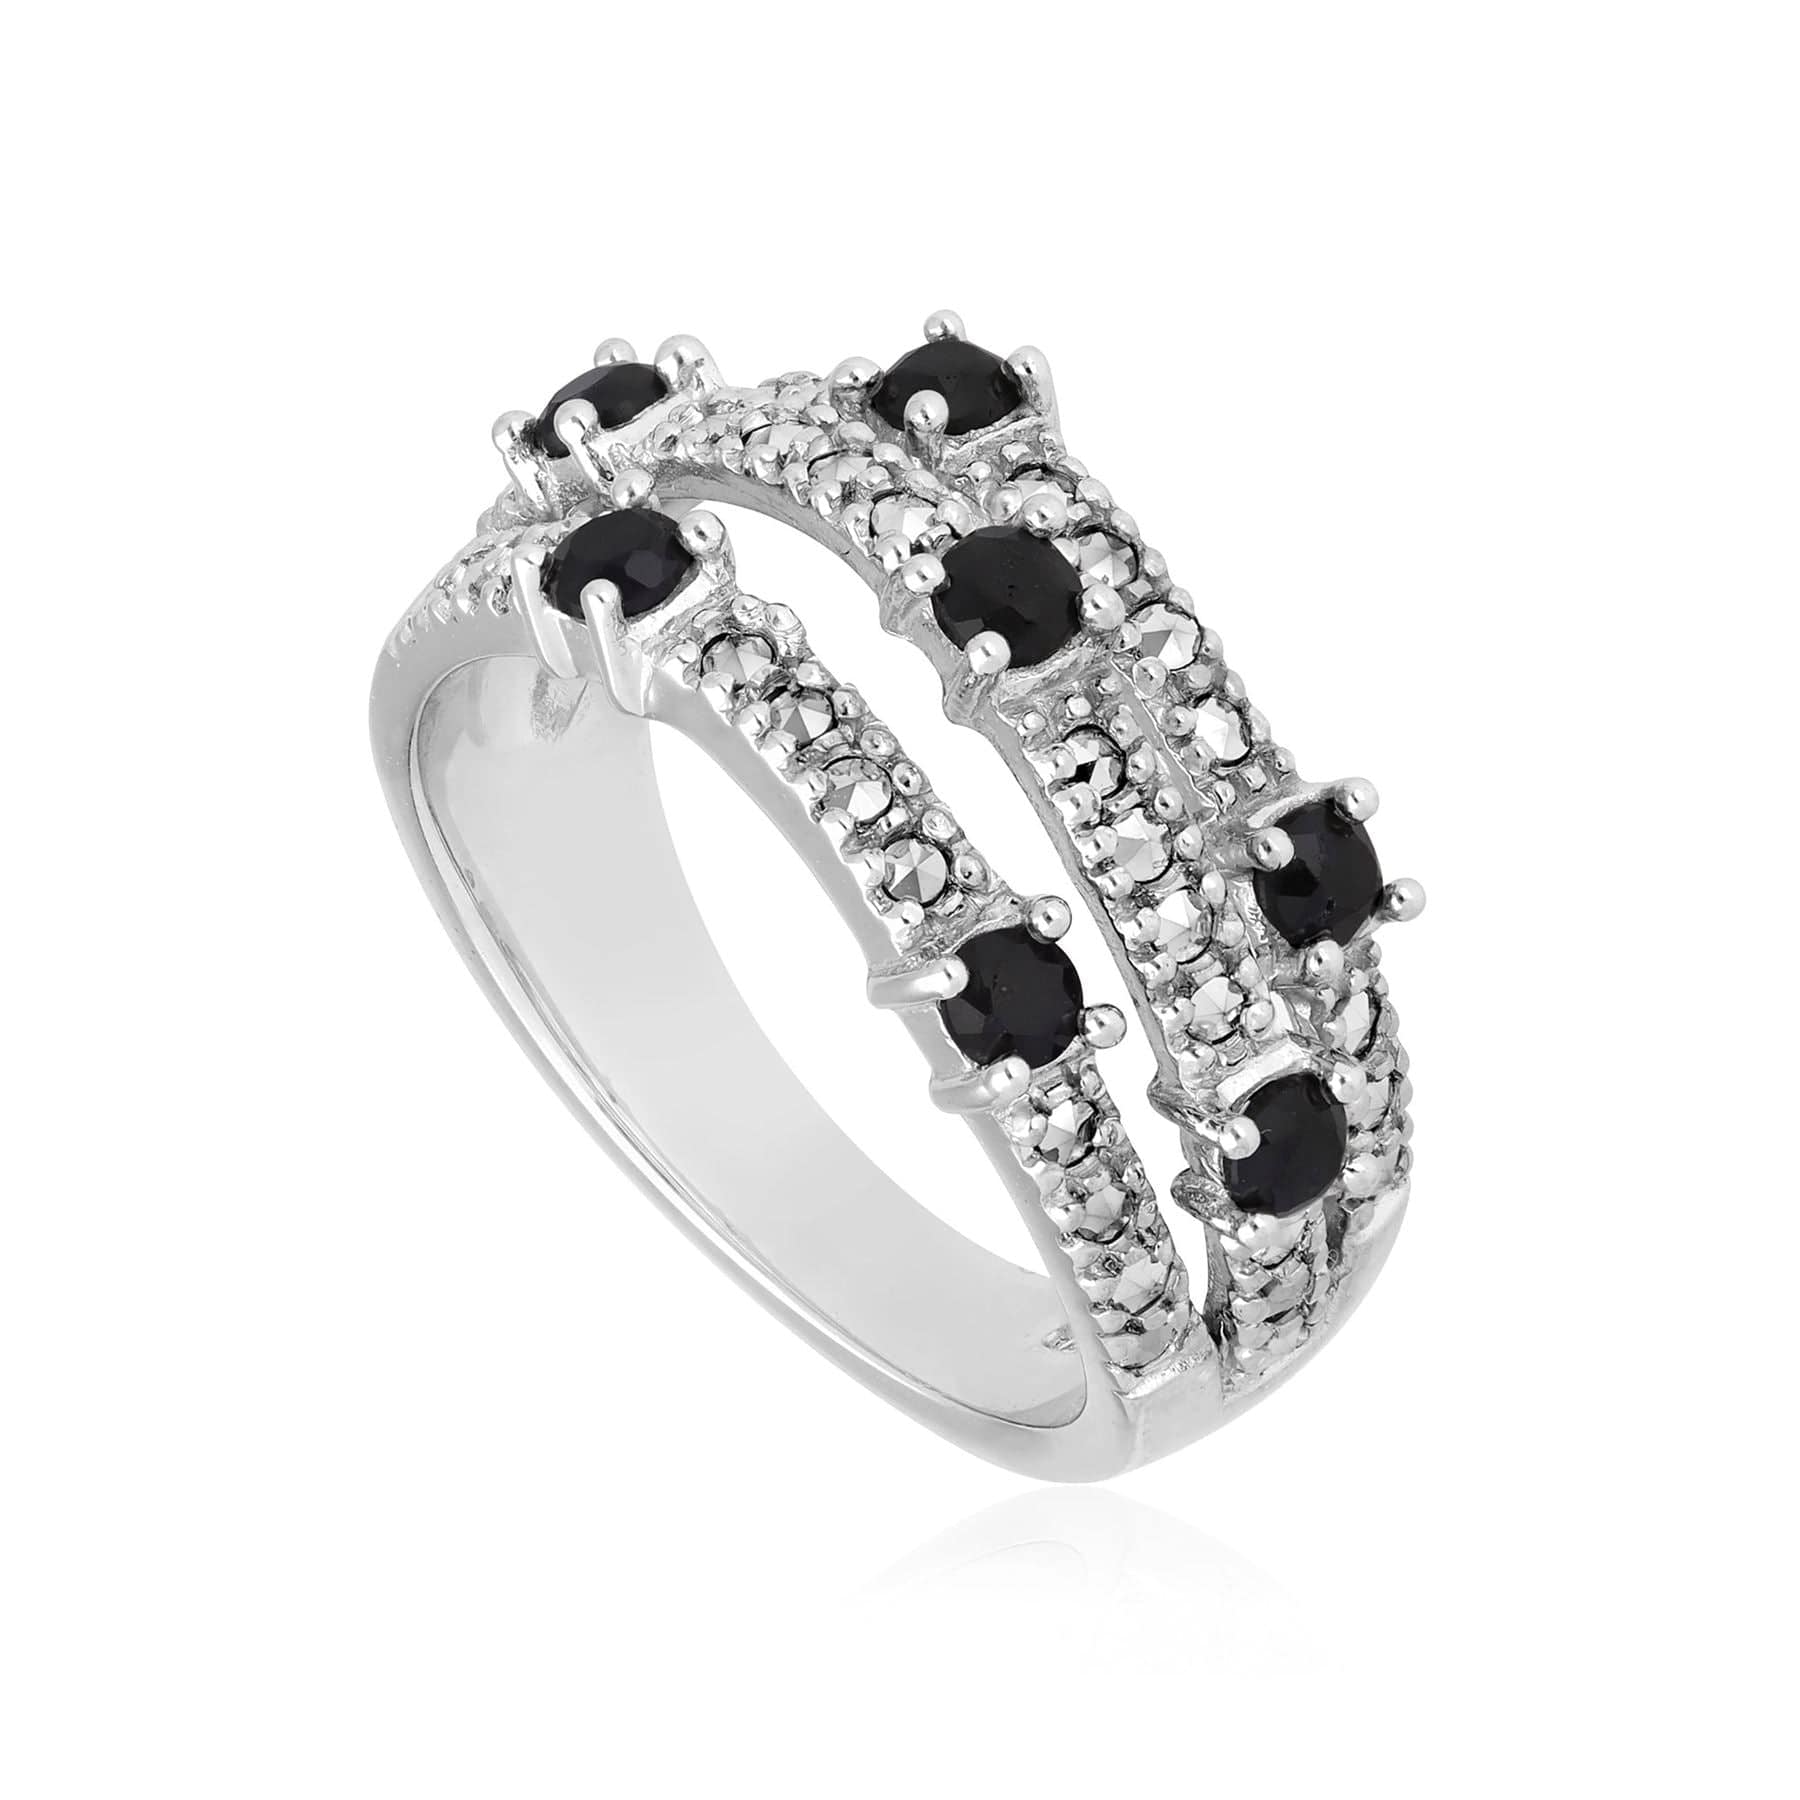 Kosmos Black Sapphire and Marcasite Ring in Sterling Silver - Gemondo